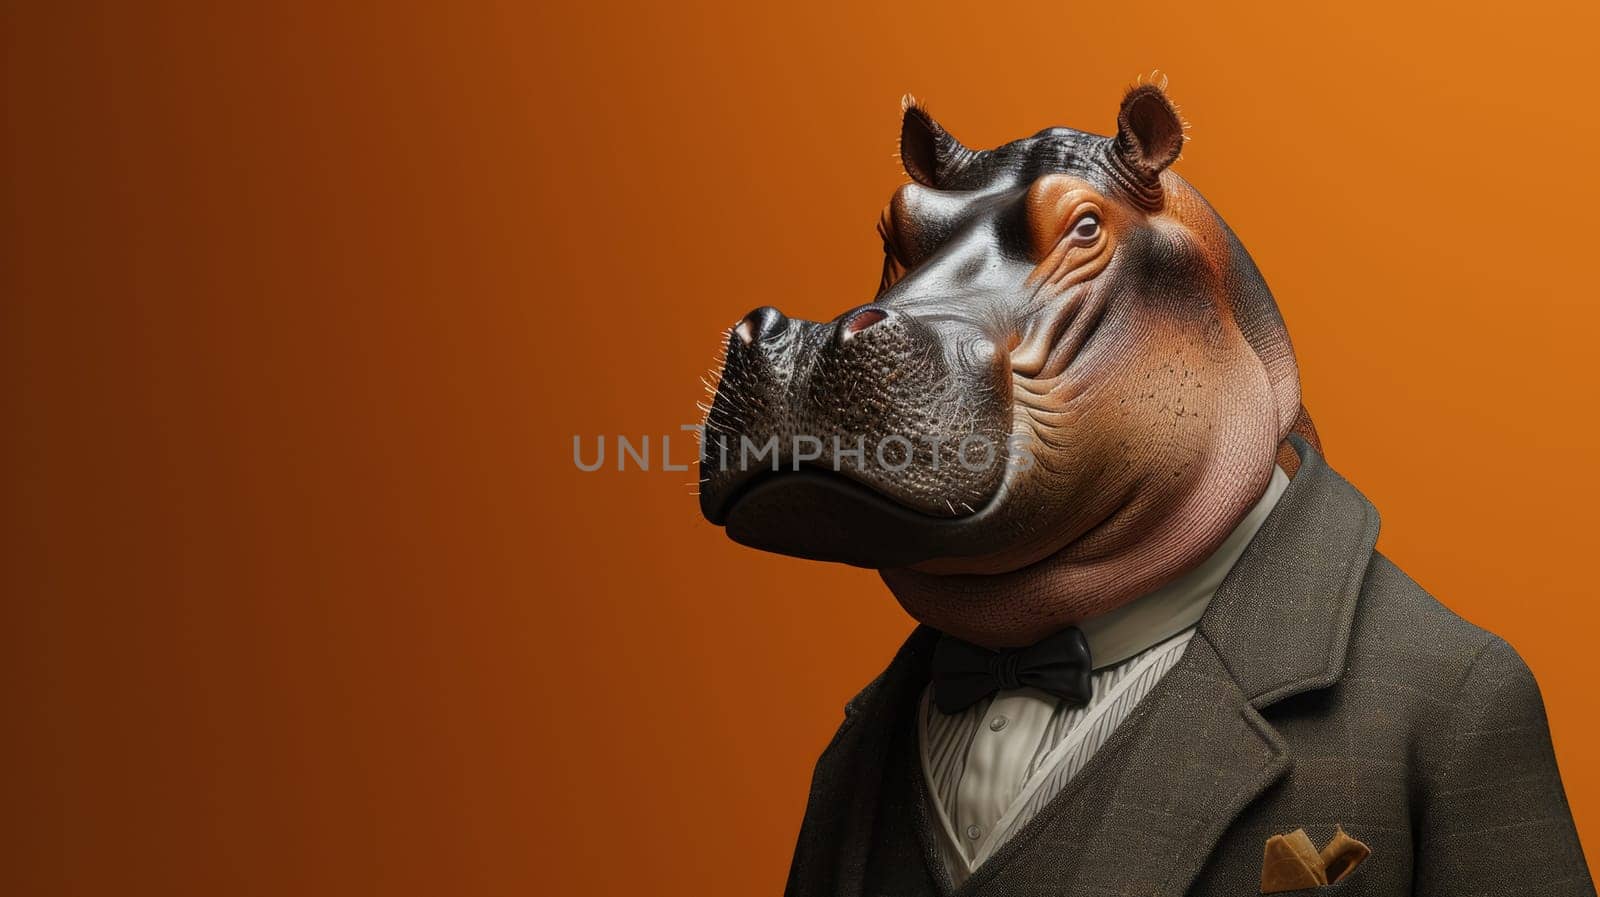 A hippo wearing a suit and tie with an orange background